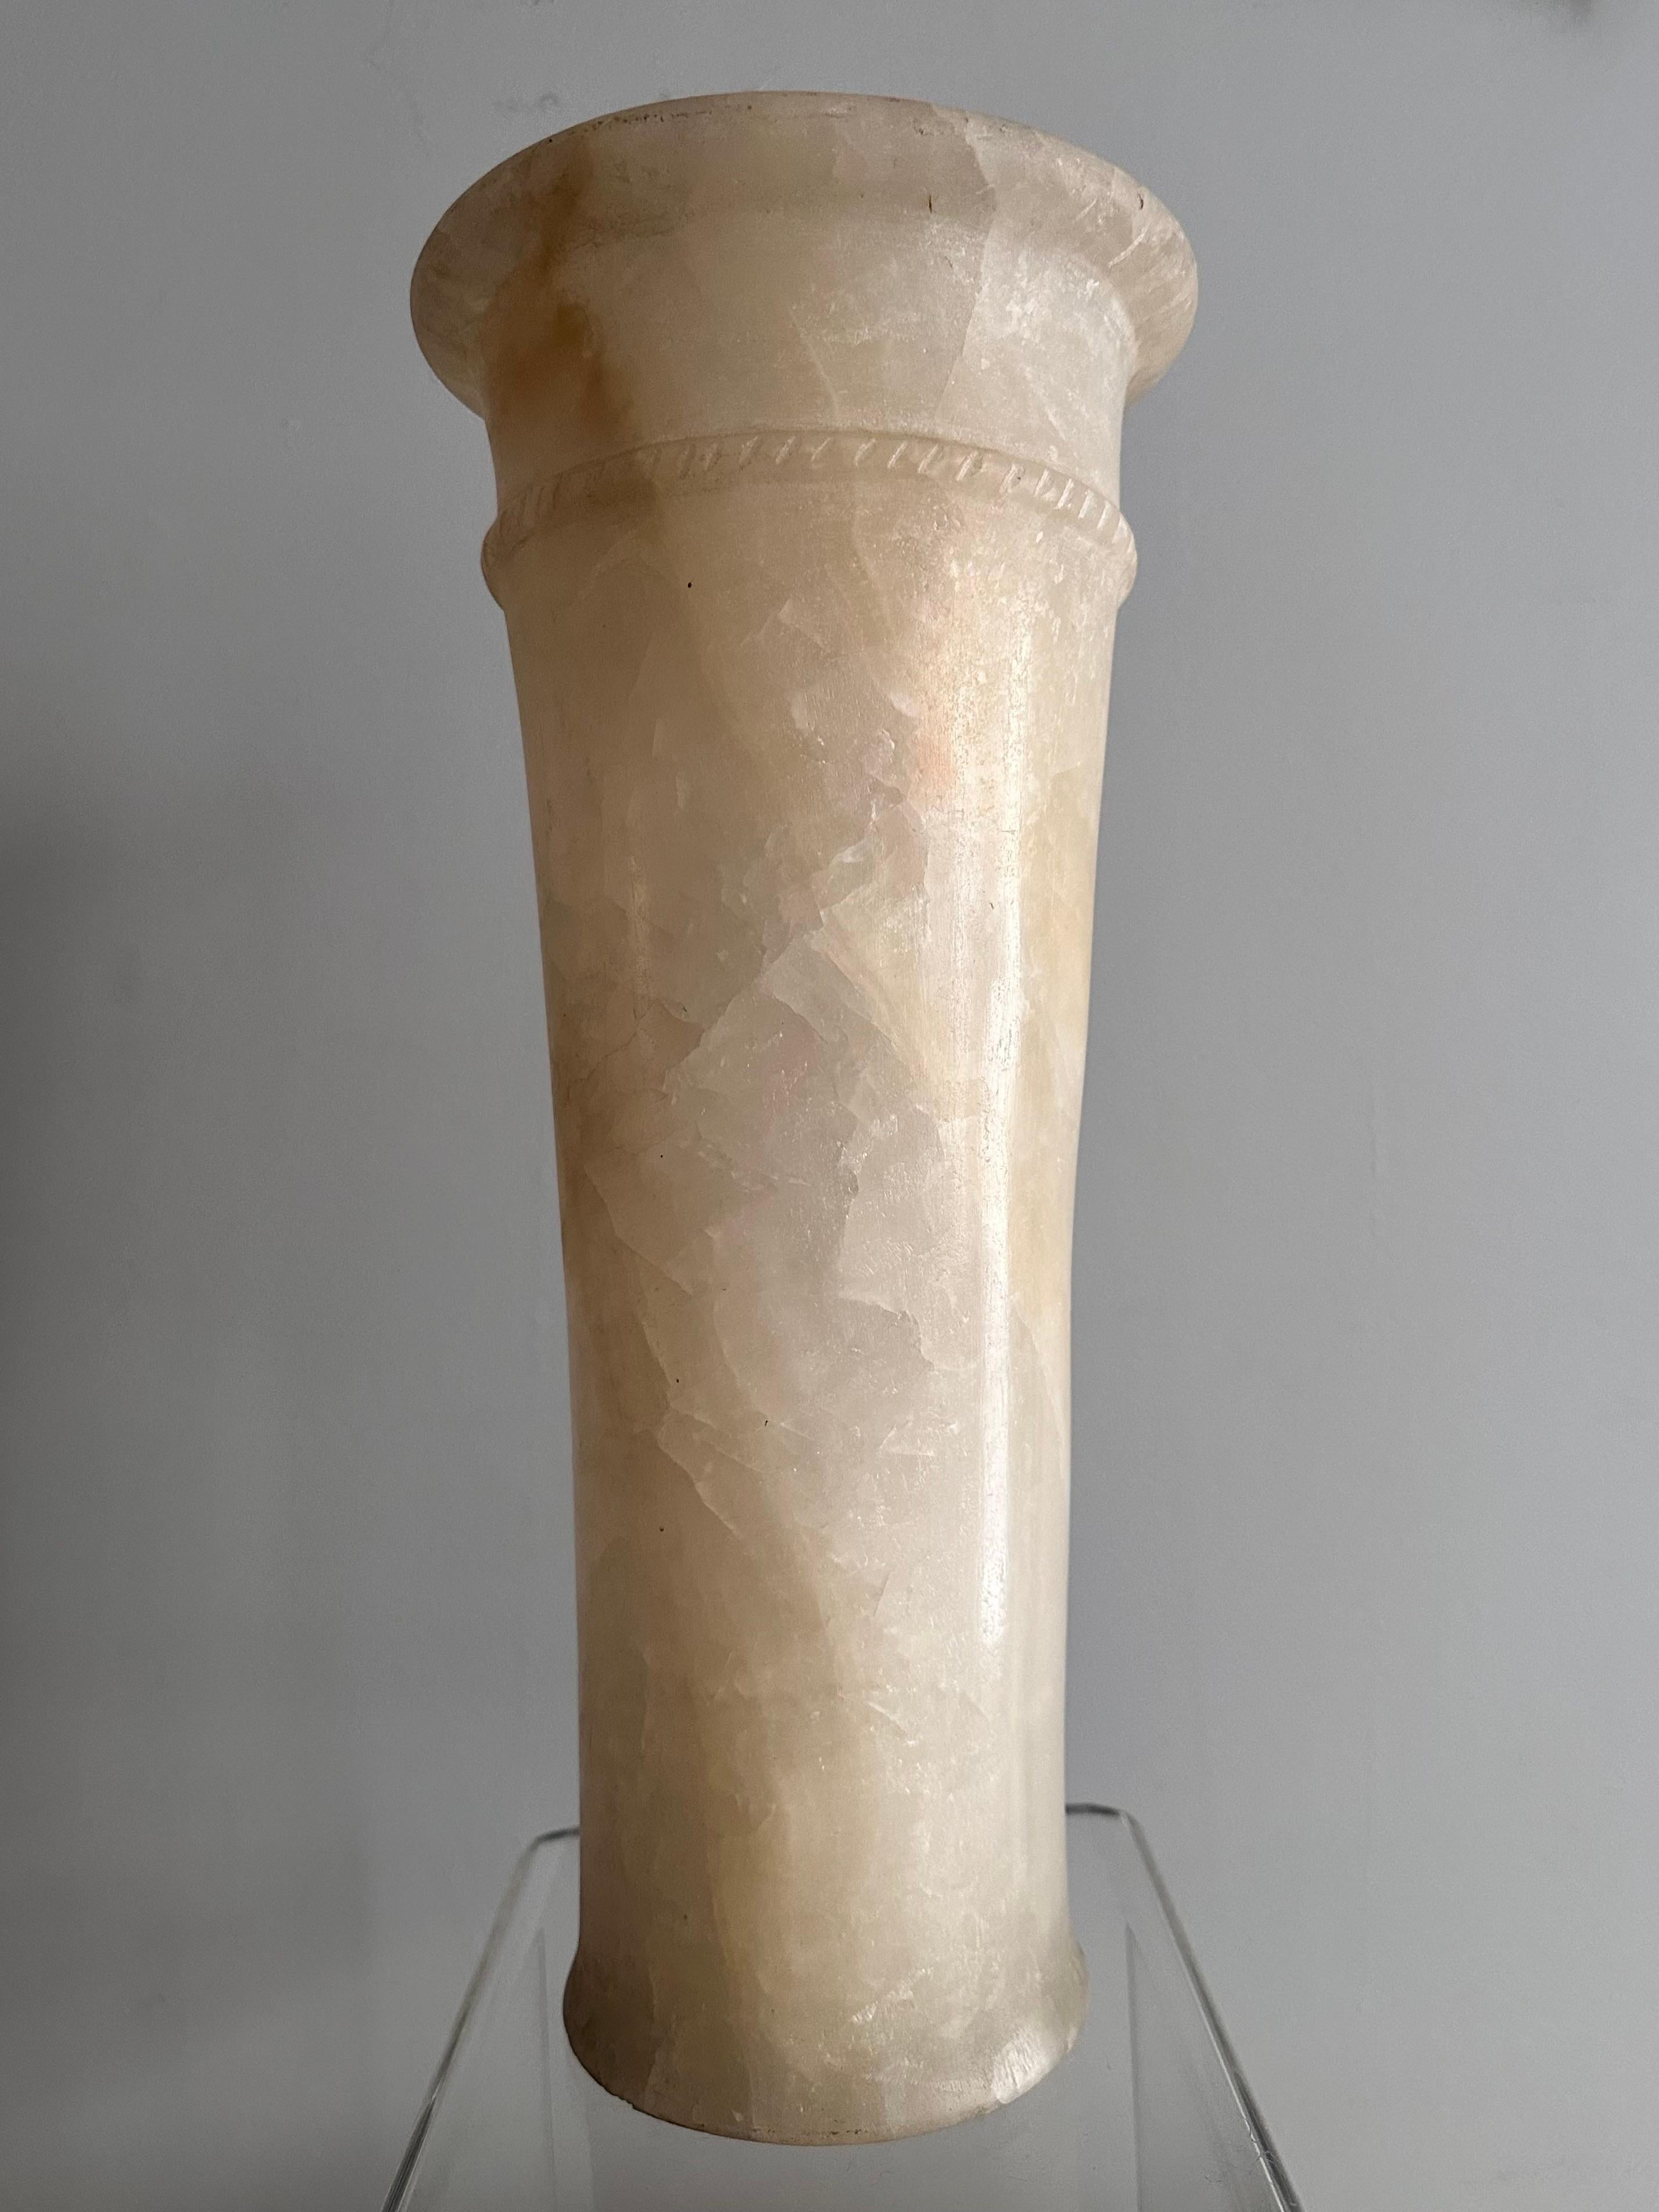 Alabaster cylindrical vase Egyptian style, 20th century.
A planar base and lightly flared  accentuated with a segmented, cord-patterned ring in relief, all beneath a thick, annular rim.  
Height 36,5 cm
